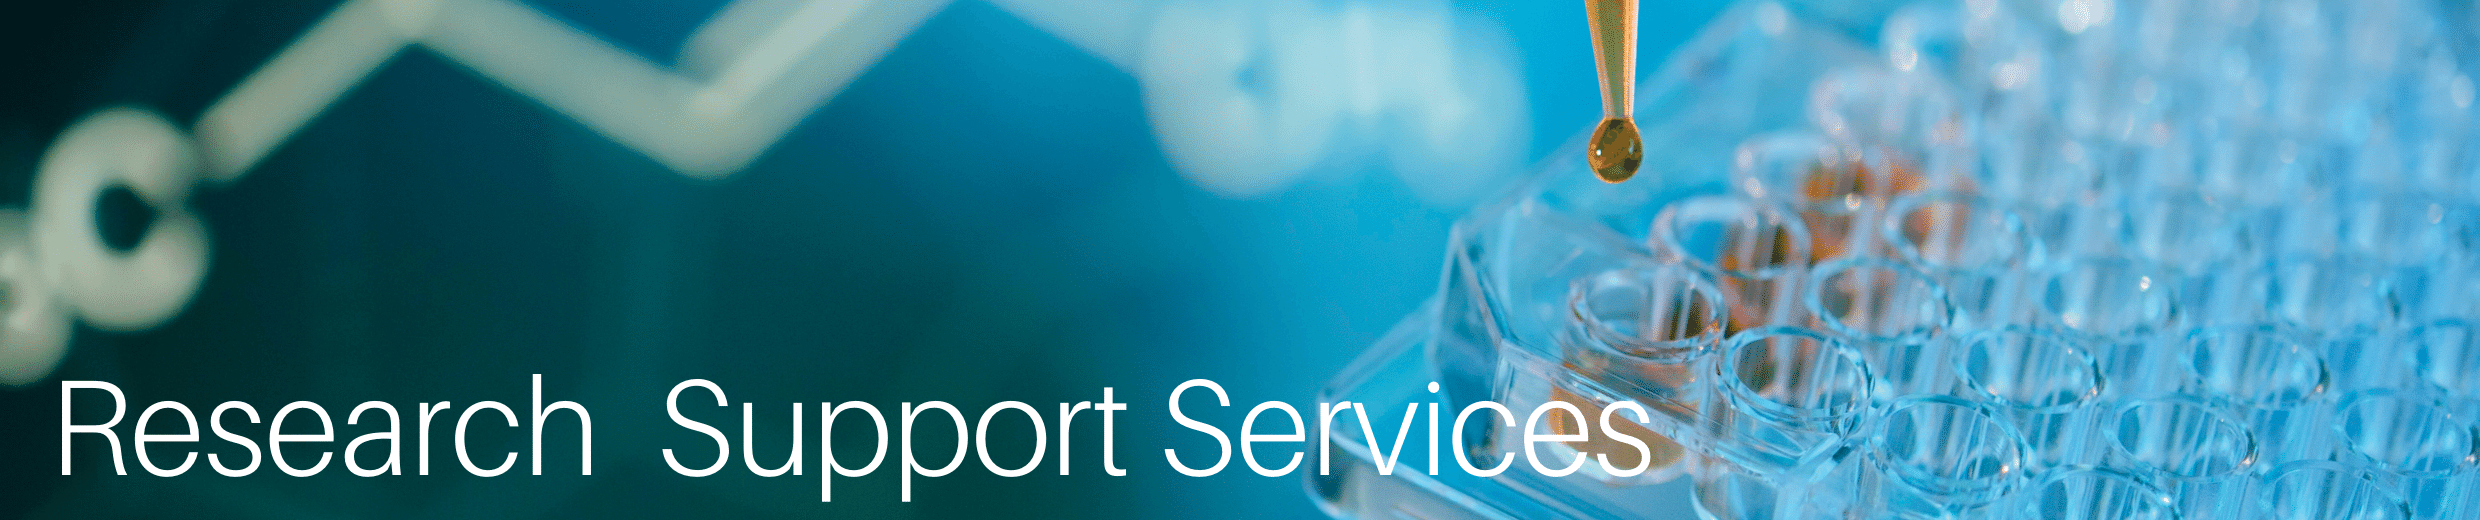 Research Support Services